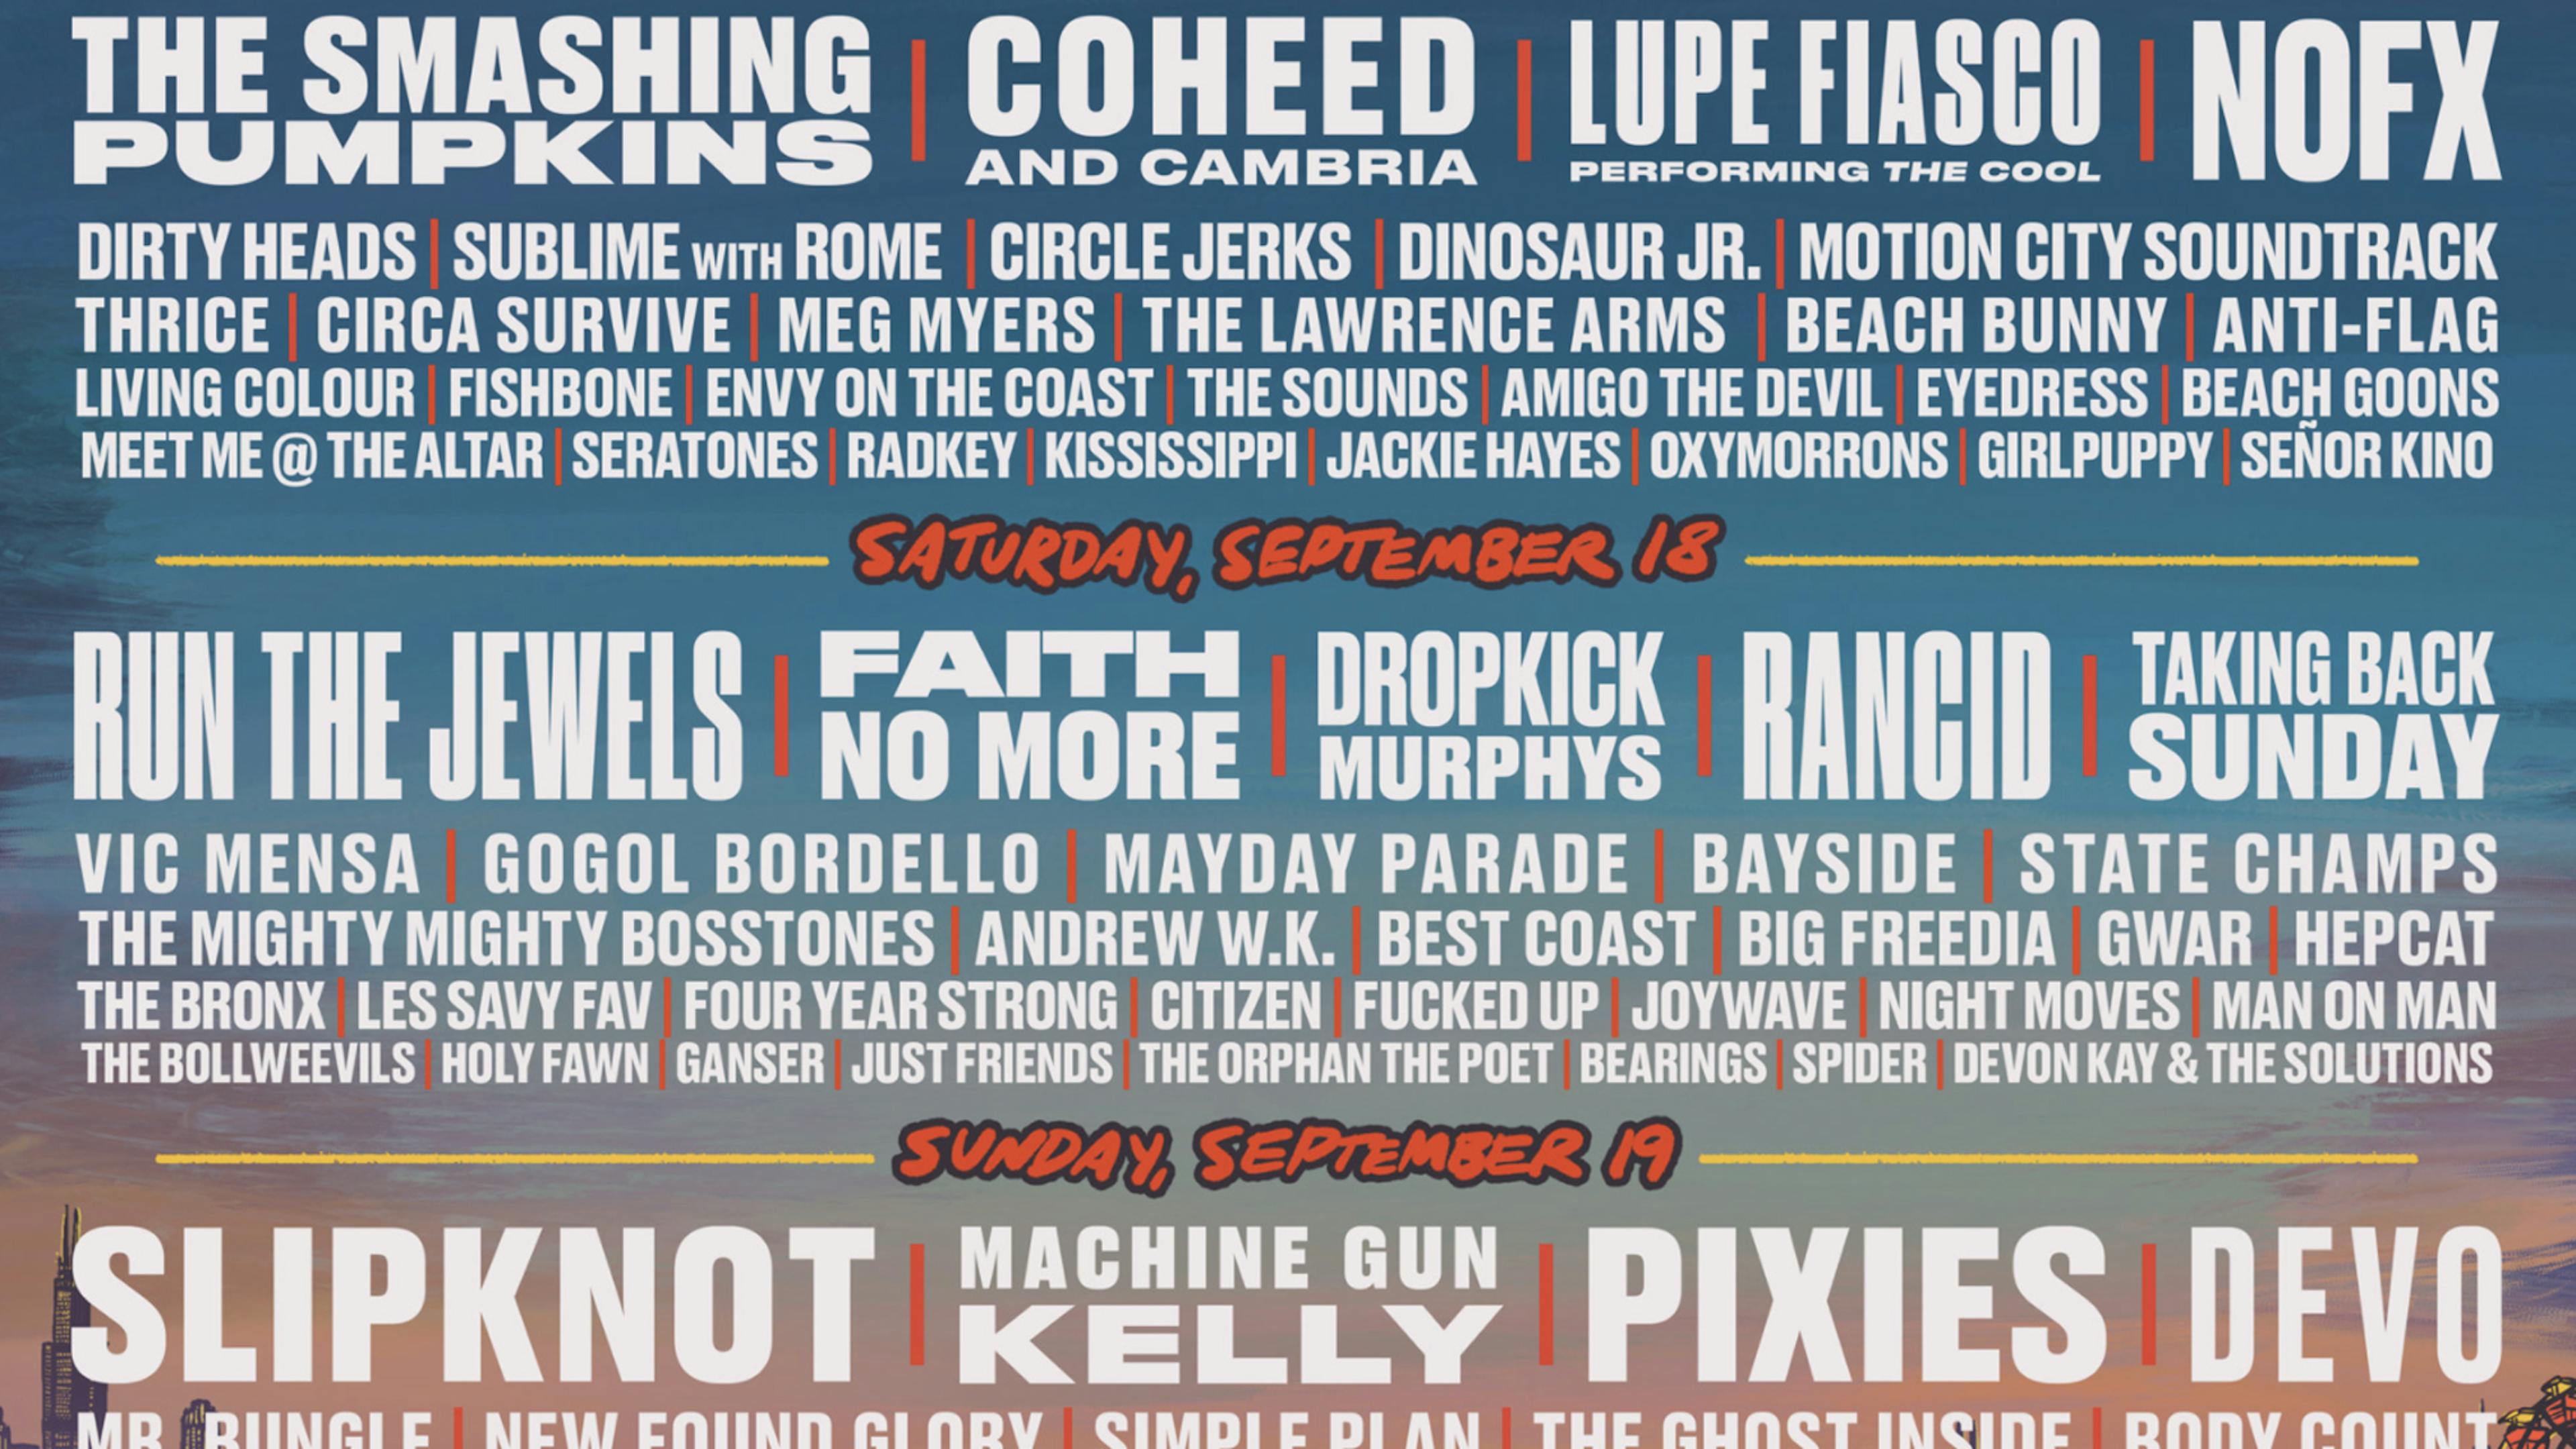 Slipknot replace Nine Inch Nails at next month's Riot Fest | Kerrang!